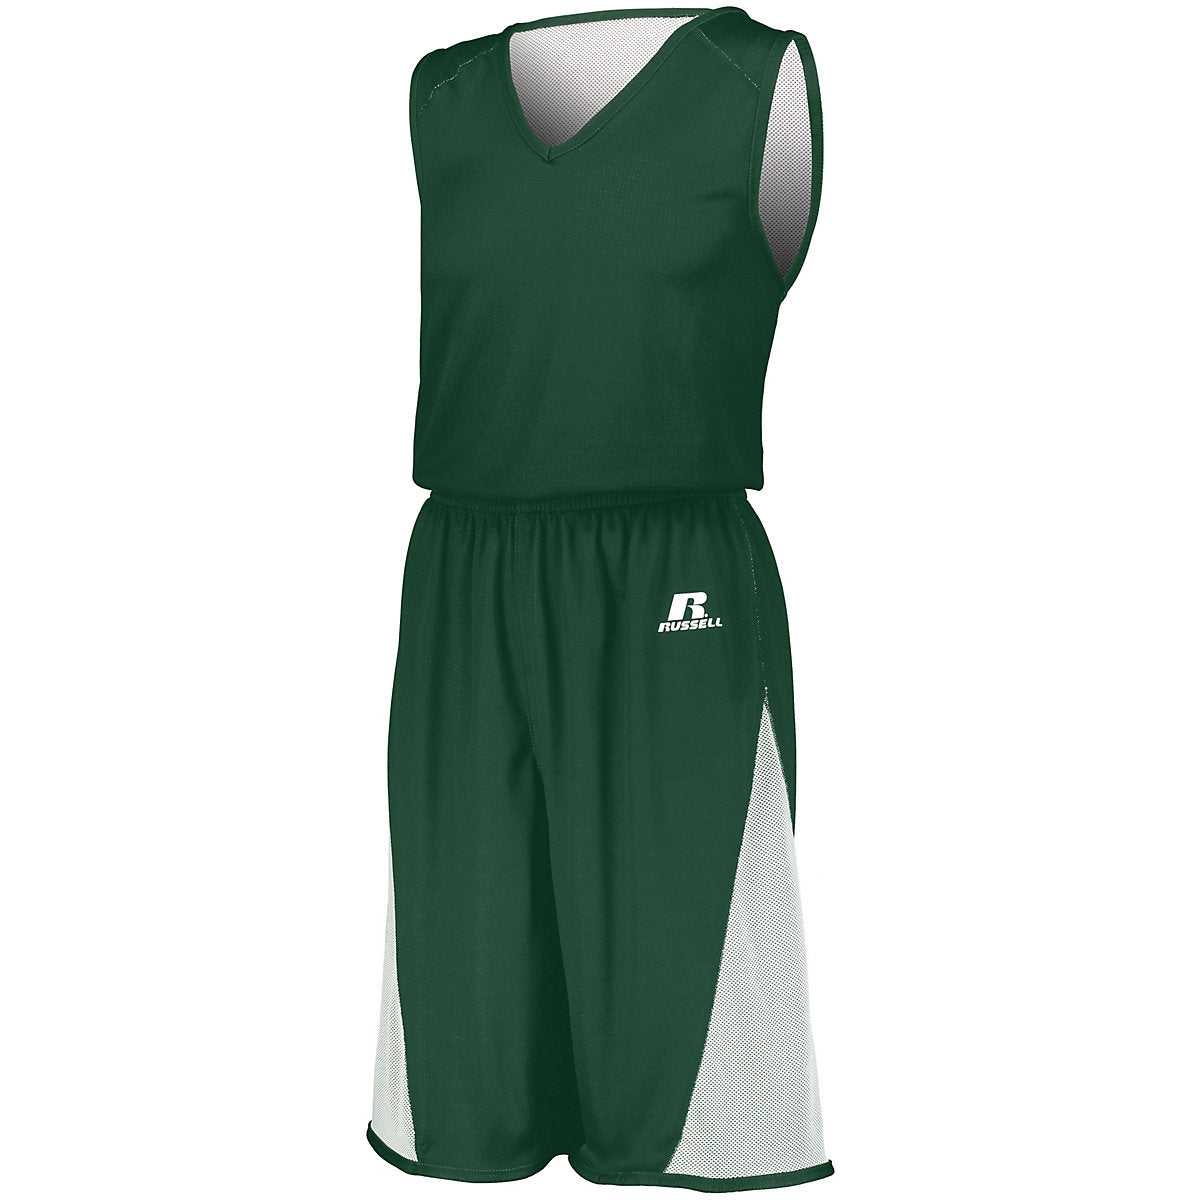 Russell 5R5DLM Undivided Single Ply Reversible Jersey - Dark Green White - HIT a Double